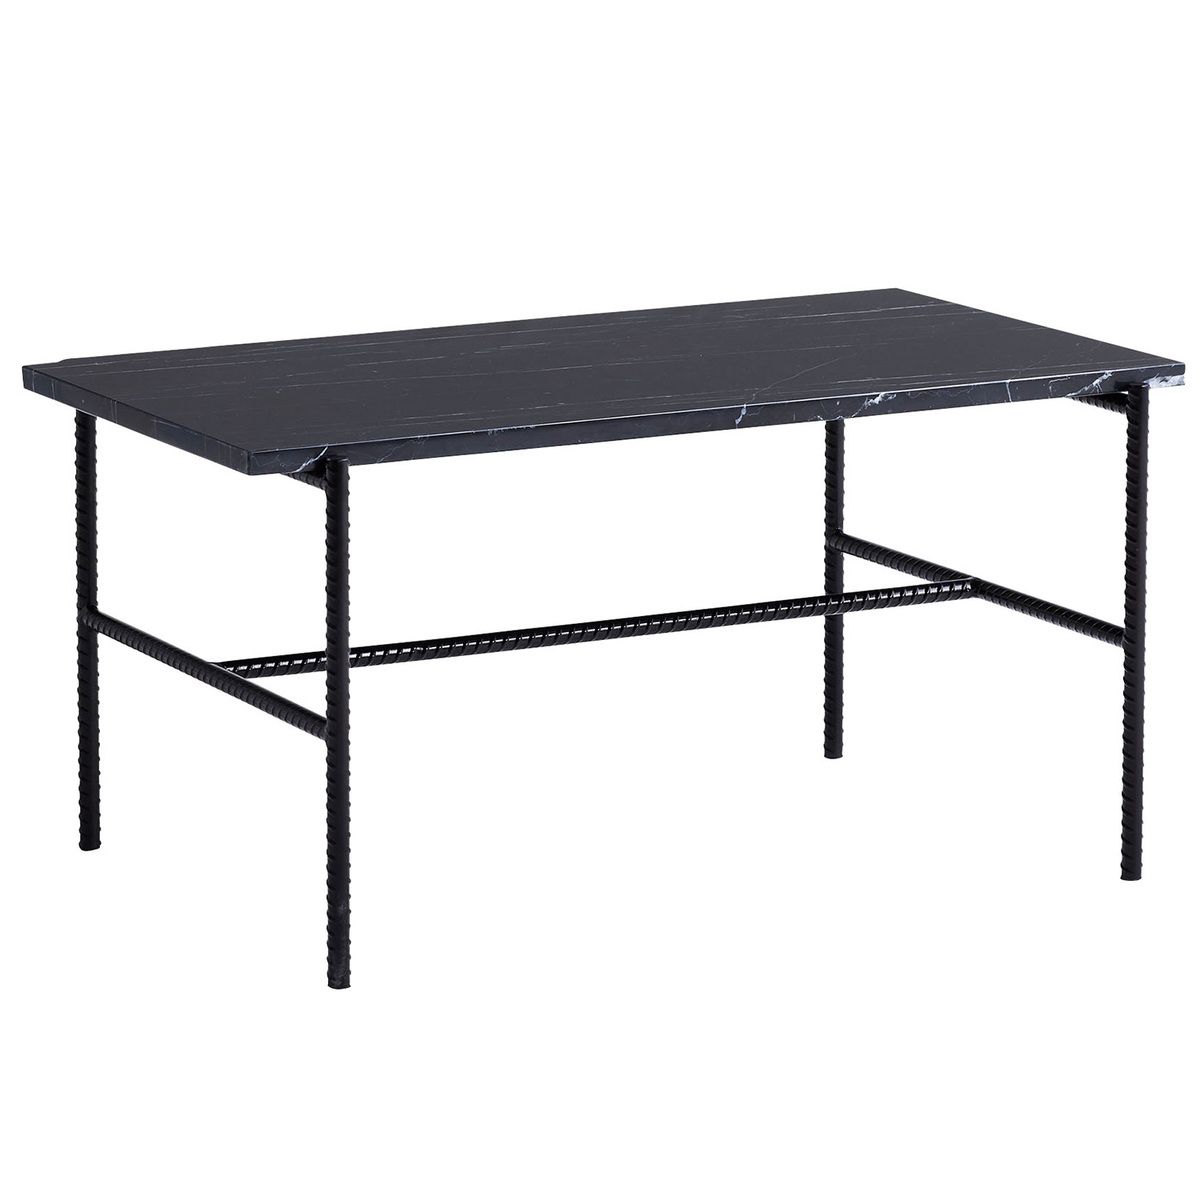 Rebar Coffee Table 80 X 49 Cm, Black Marble Pertaining To Coffee Sign With Rebar Wall Decor (View 15 of 30)